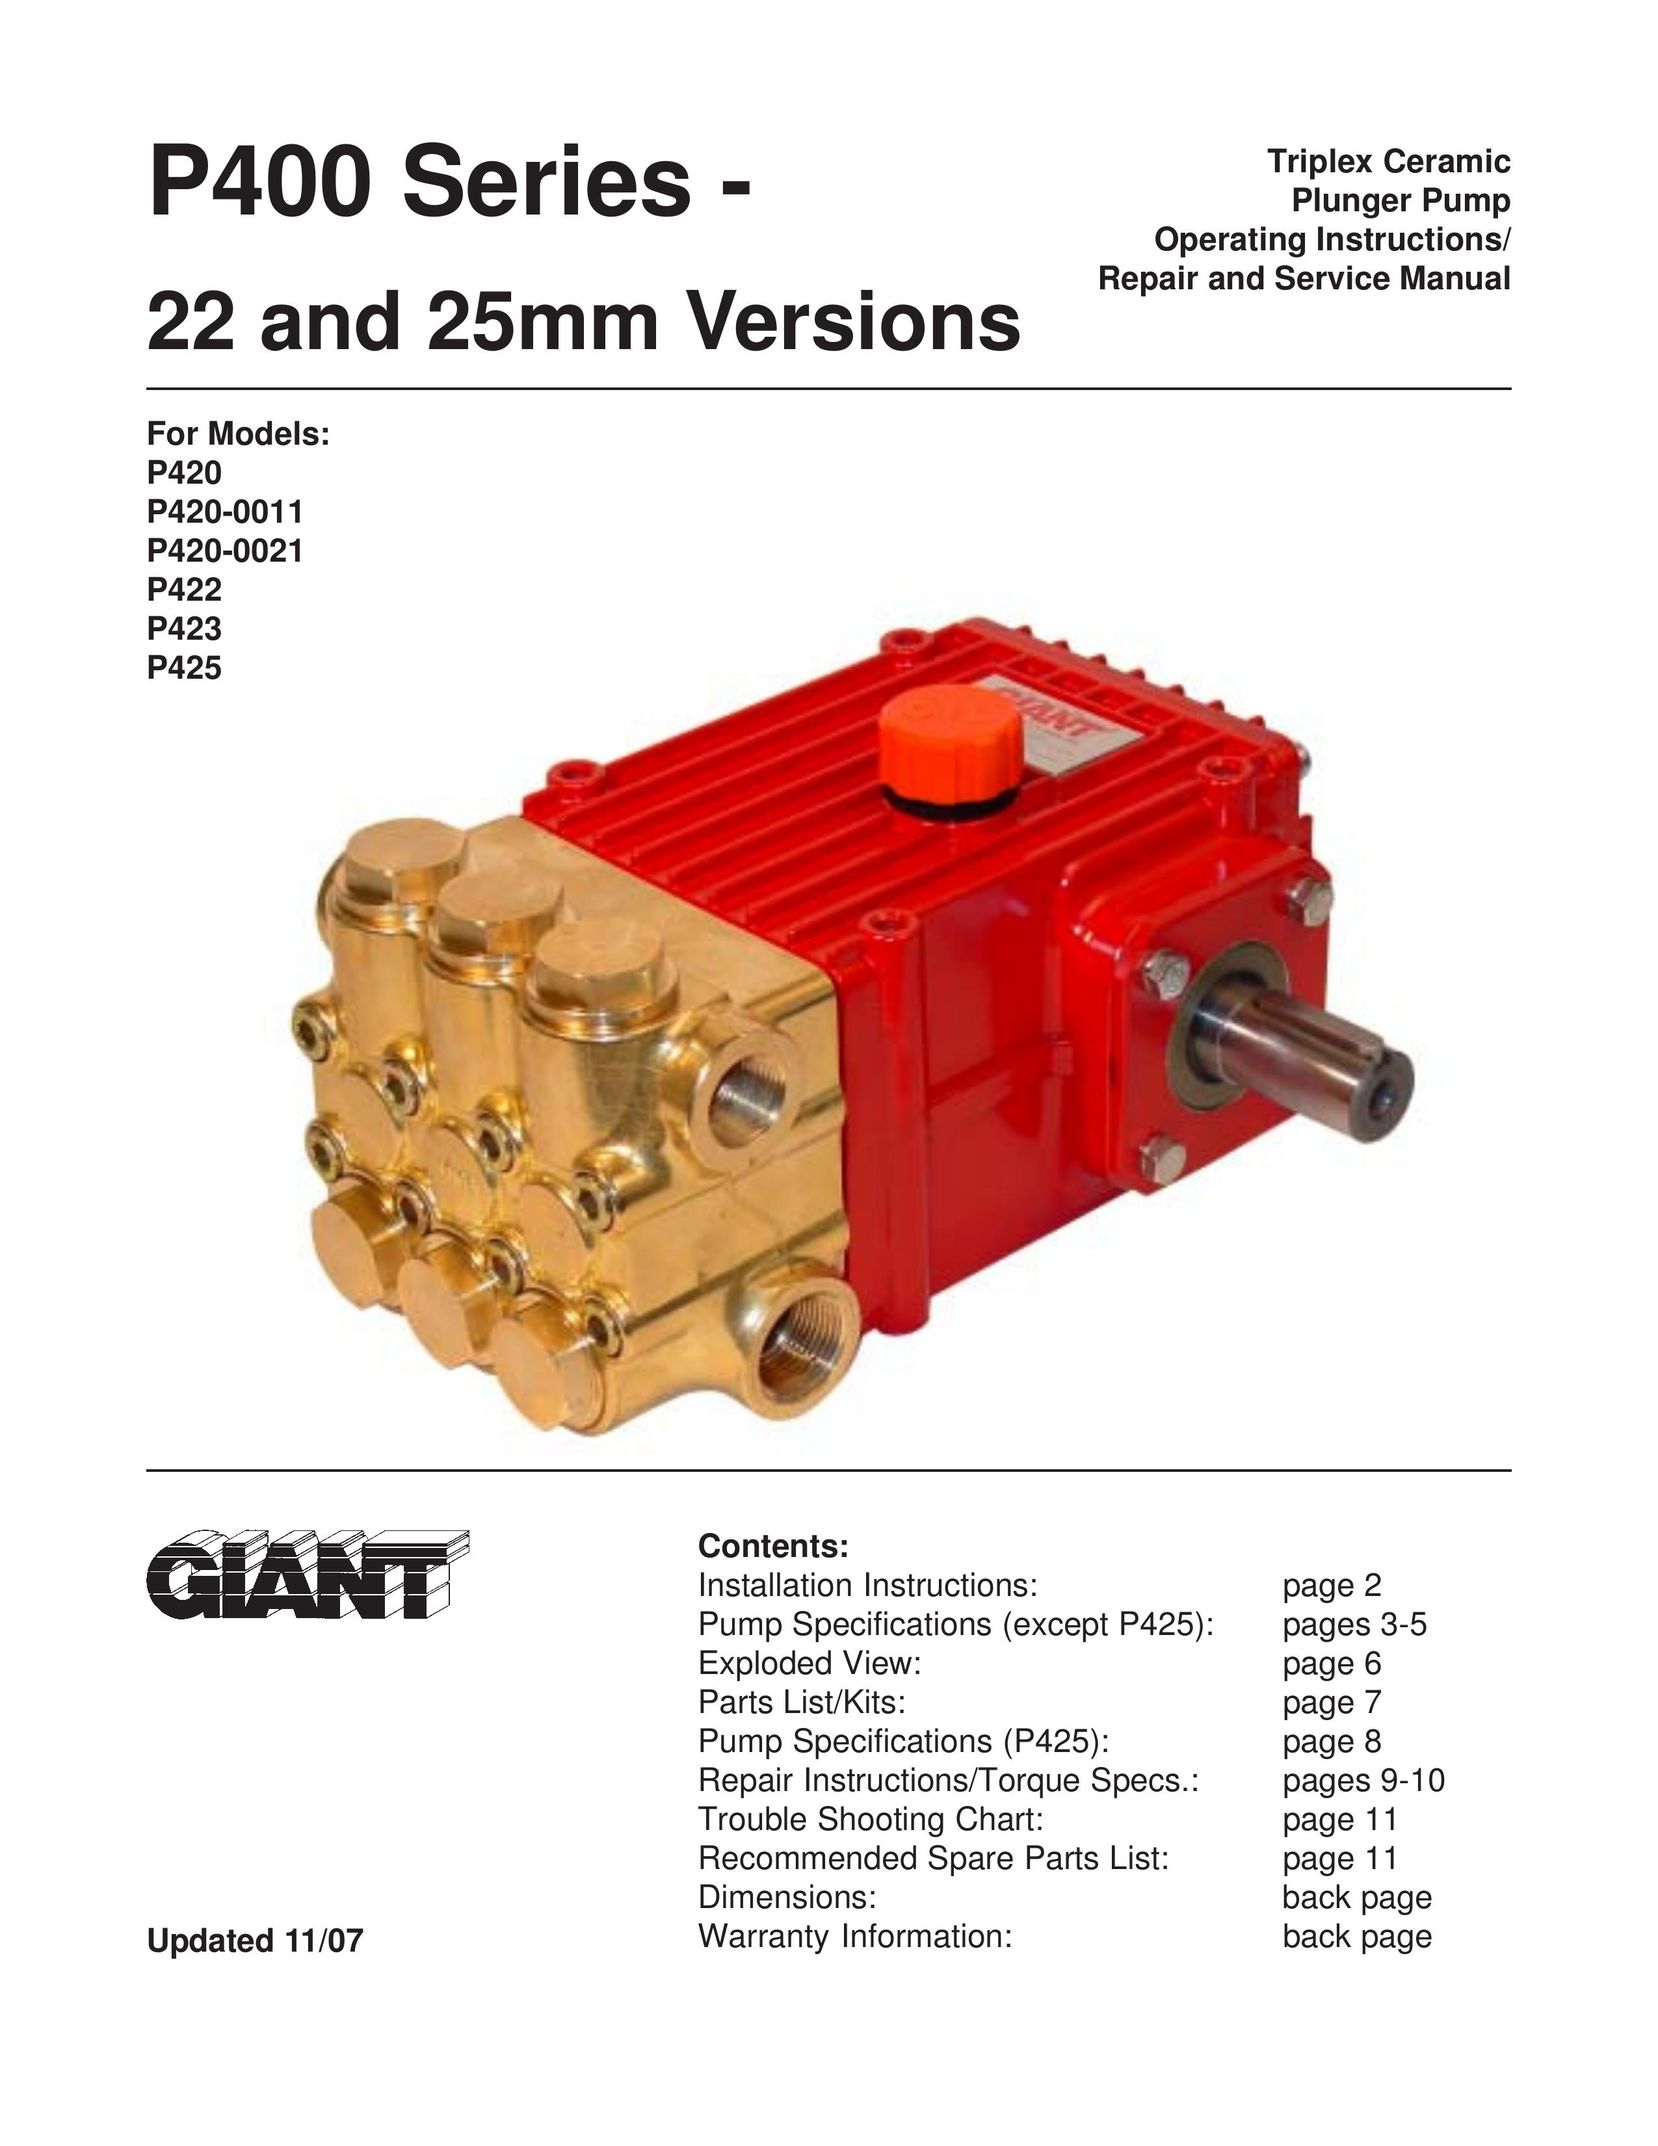 Giant P420-0021 Septic System User Manual